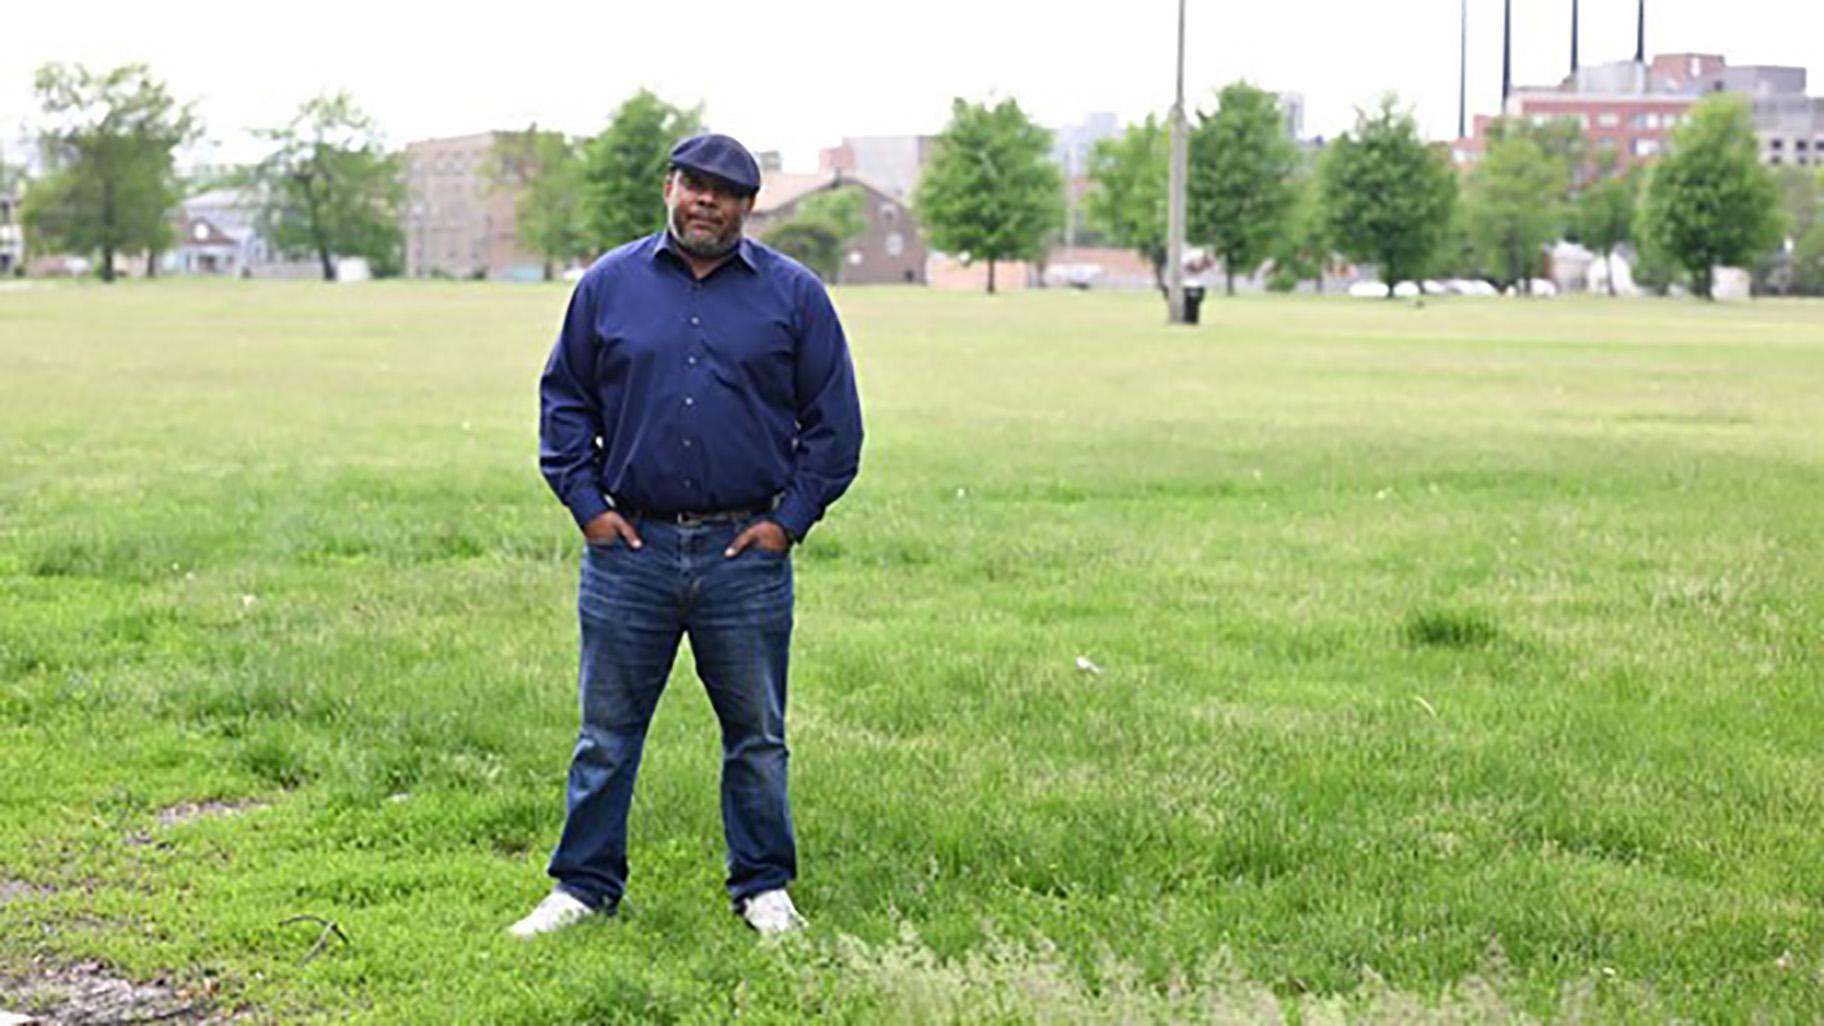 Rod Wilson on land where the ABLA Homes once stood, now the proposed site for the Chicago Fire Football Club training facility (Alexander Gouletas / special to ProPublica)